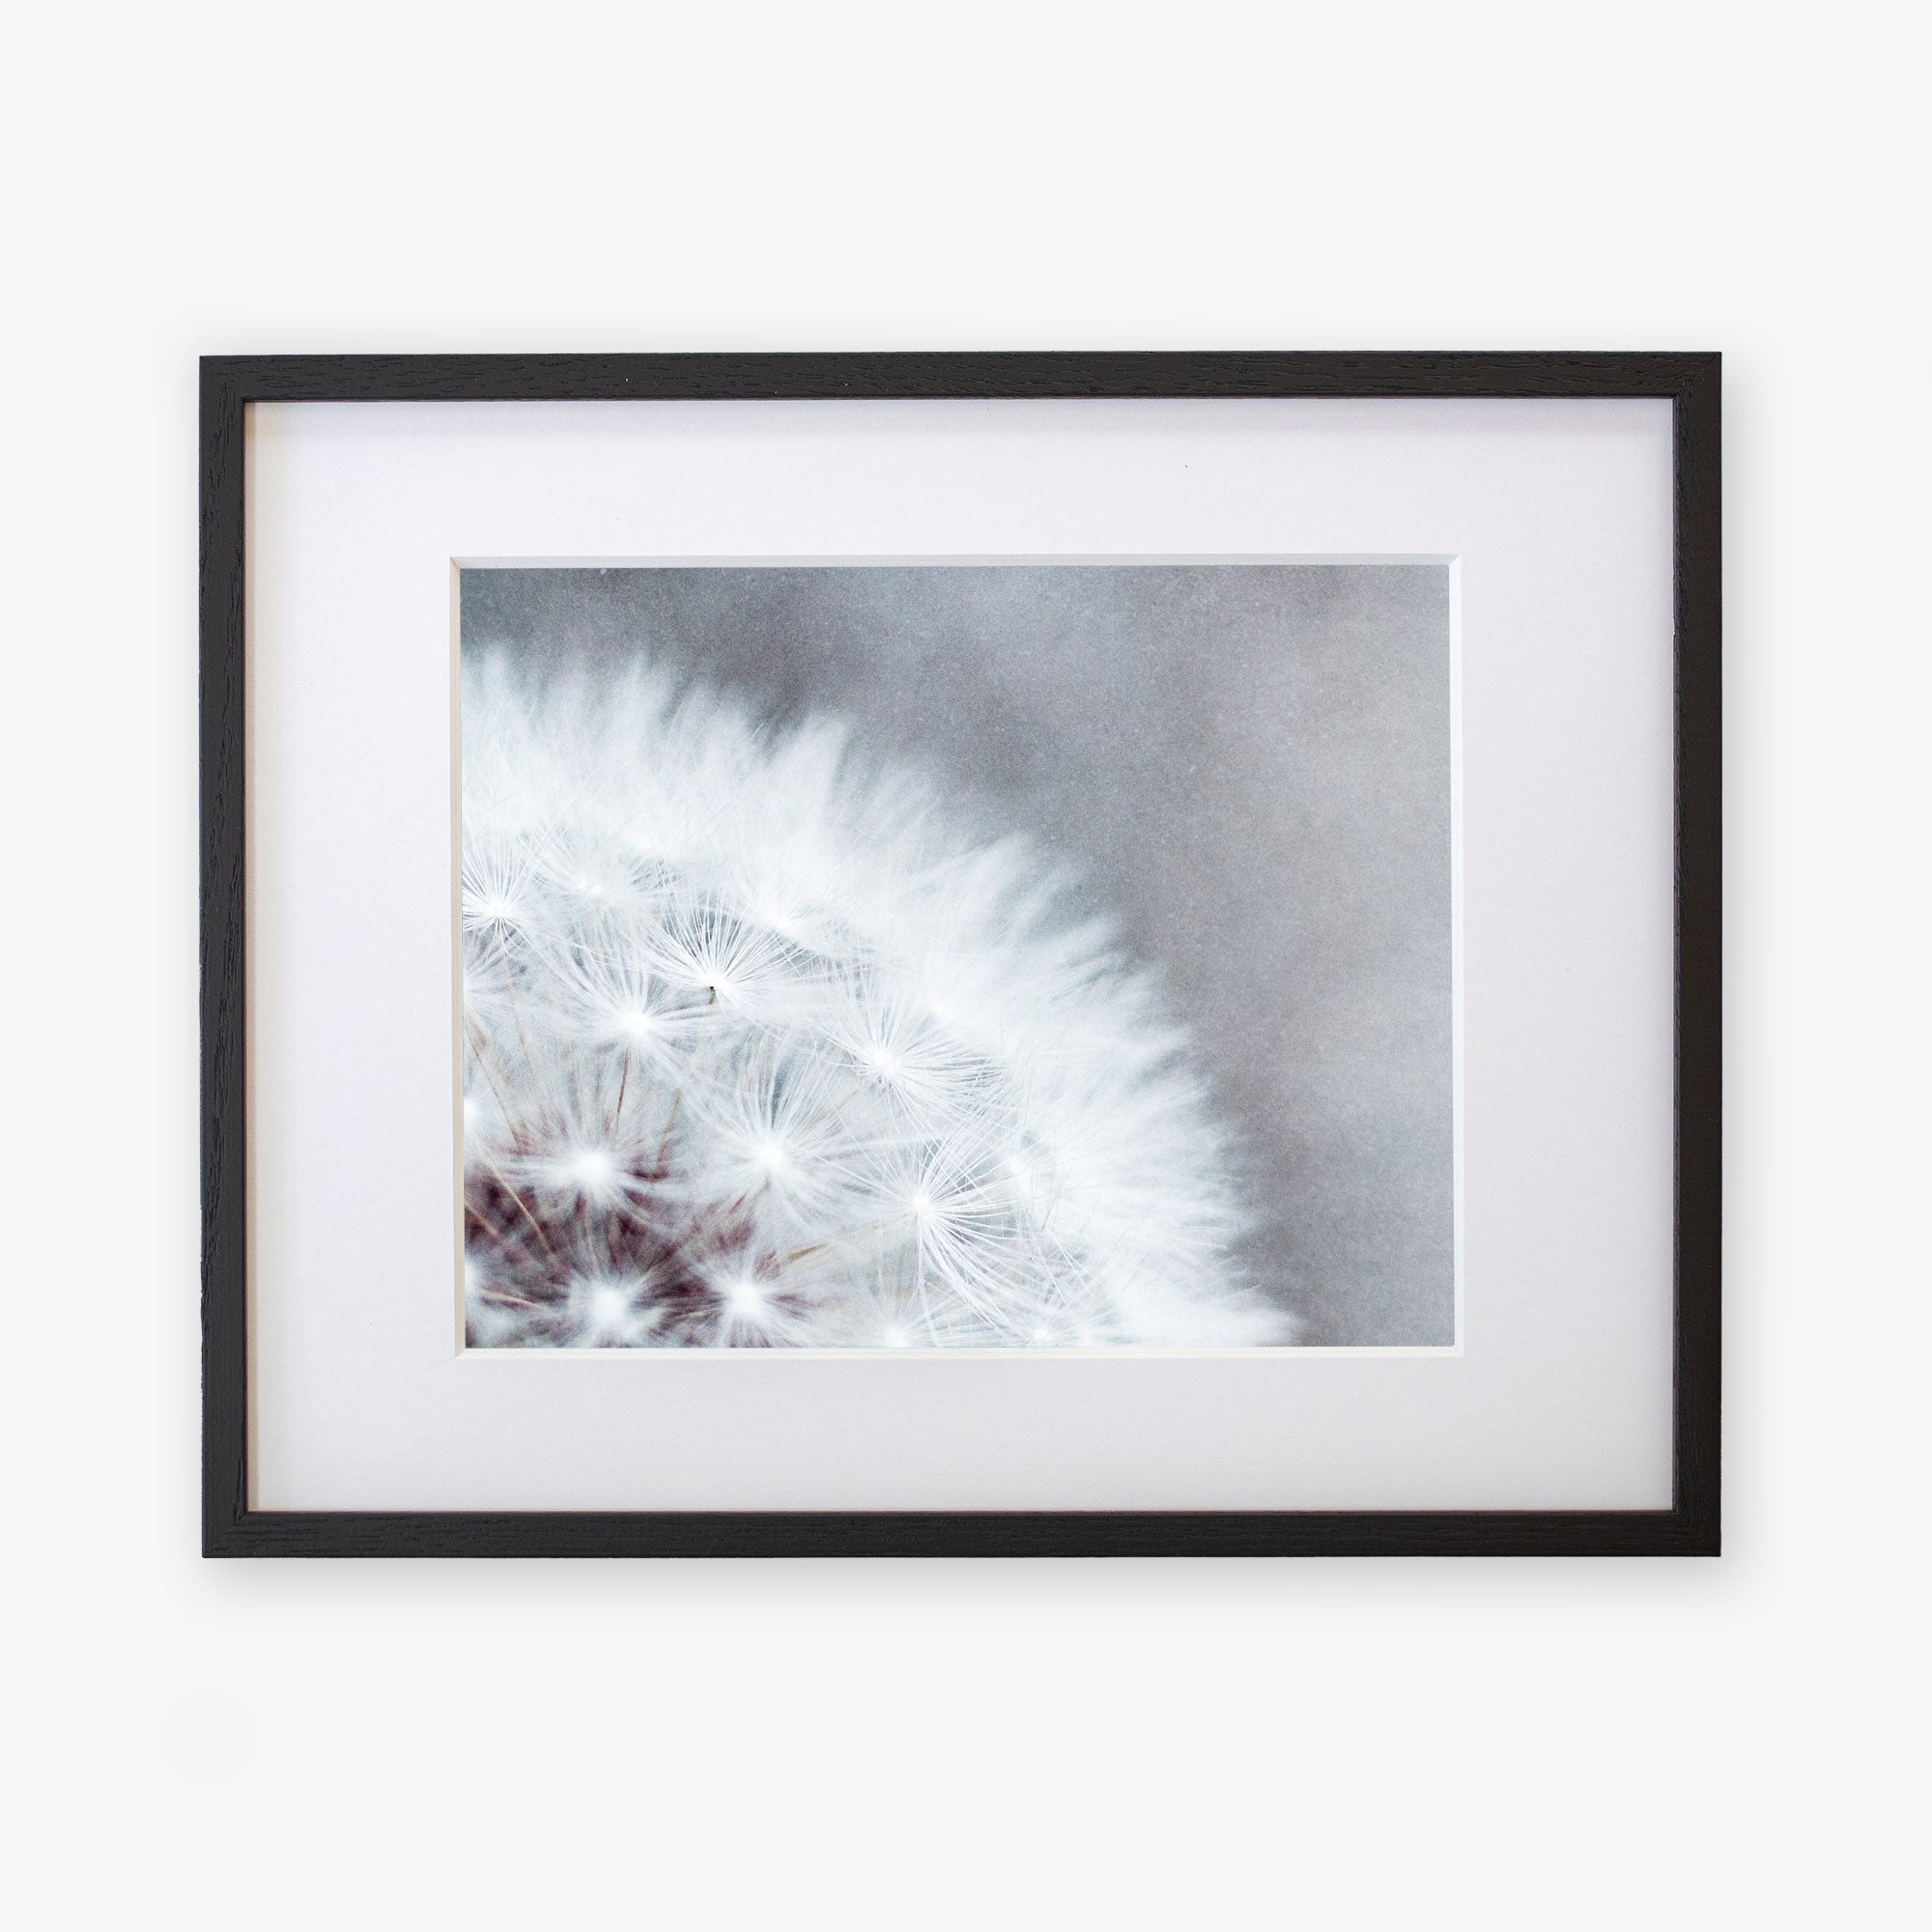 A framed Grey Botanical Print, &#39;Dandelion Queen&#39; by Offley Green, featuring a close-up view of a dandelion tuft with delicate white filaments against a soft, blurred background. The frame is dark with a white mat border.